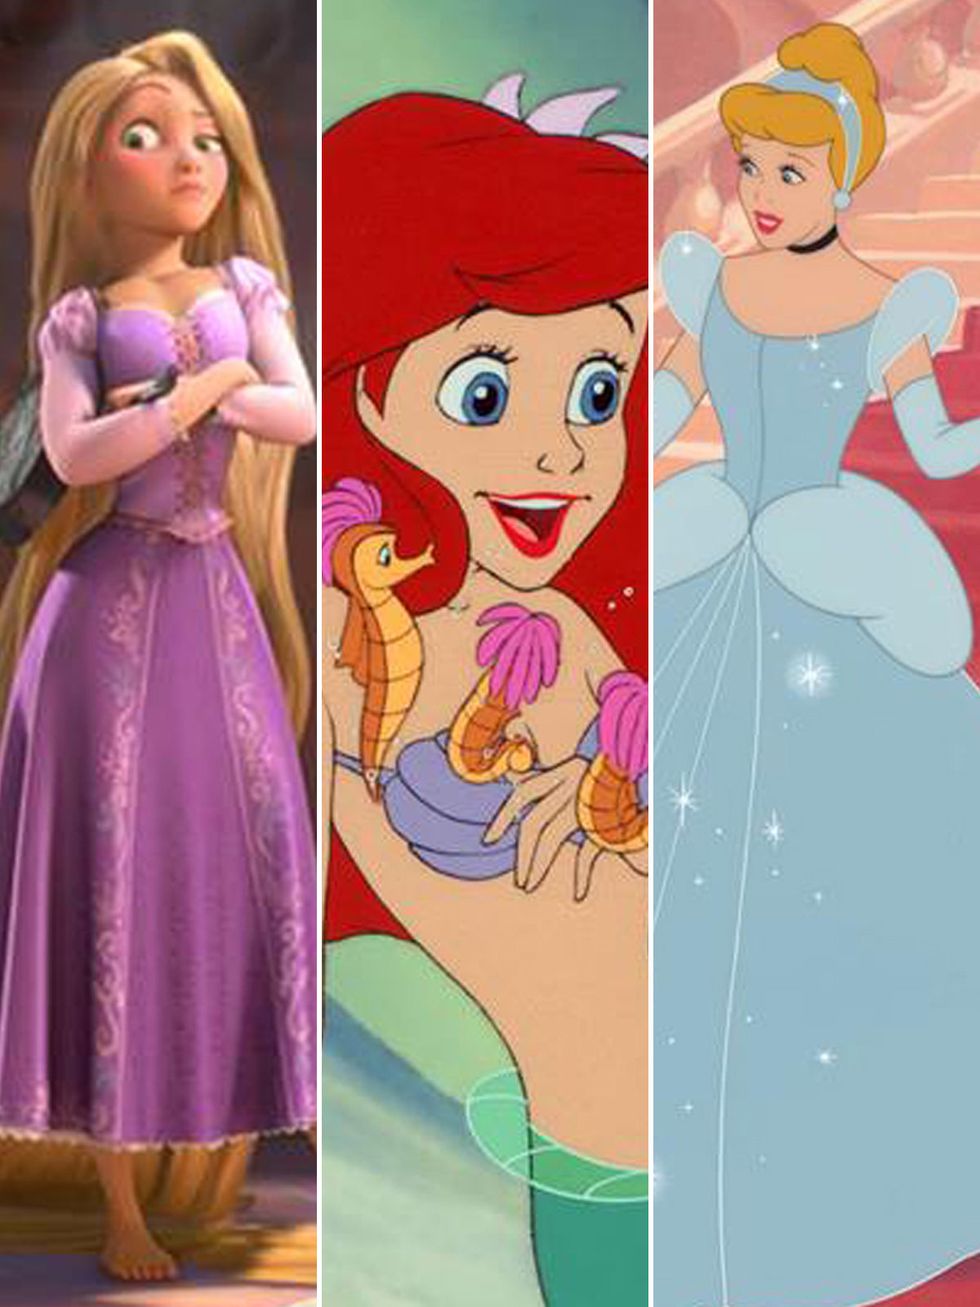 Style, Dress, Purple, Fictional character, Animation, Violet, Lavender, Doll, Peach, Animated cartoon, 